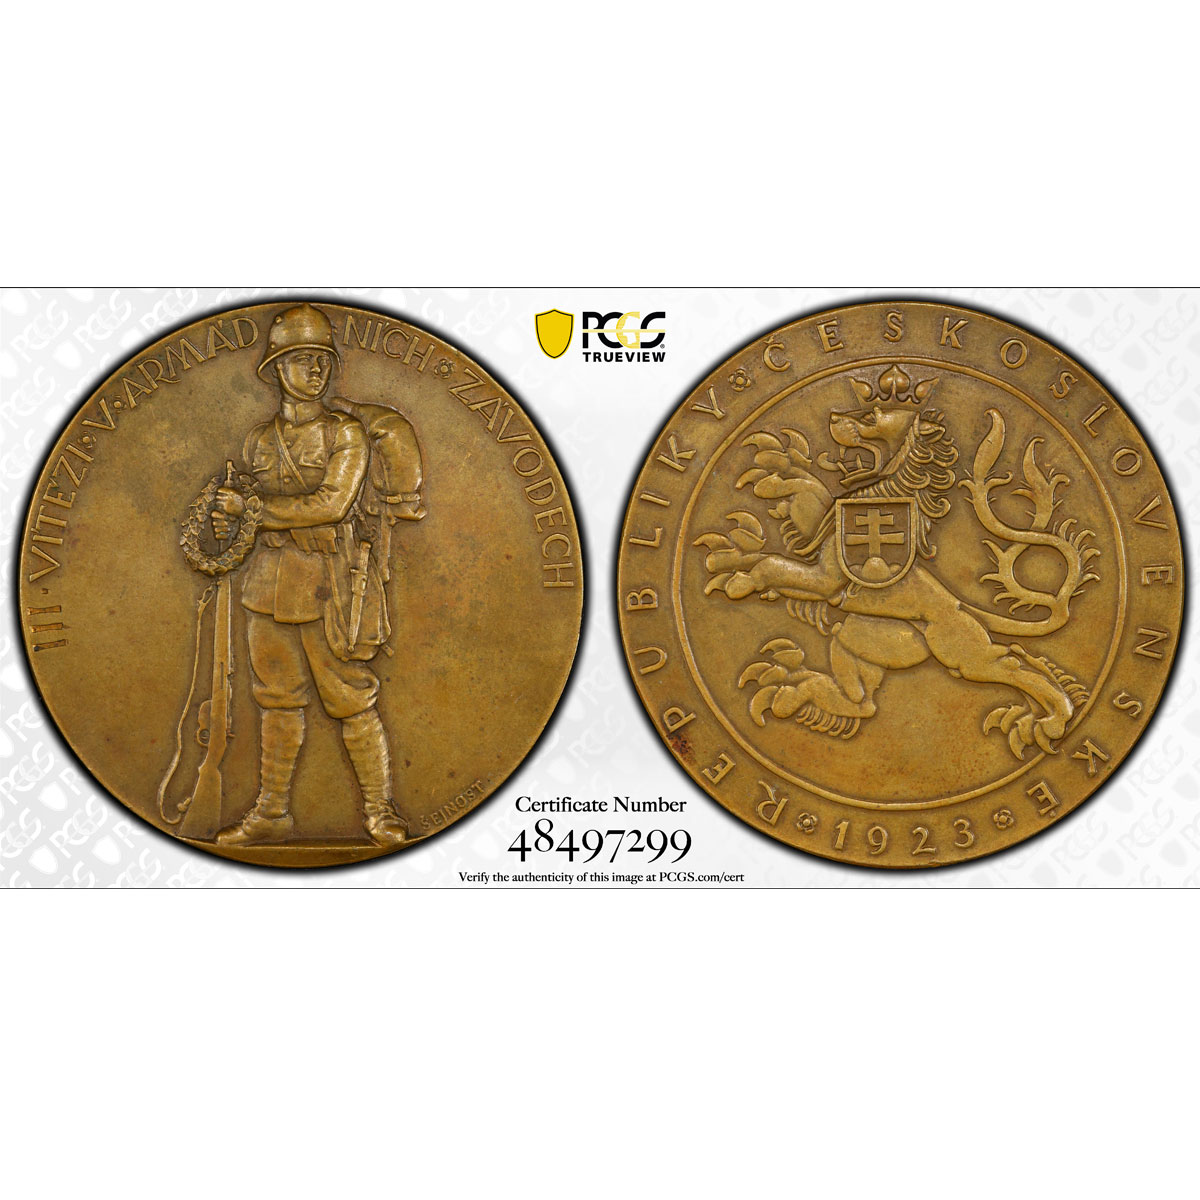 Czechoslovakia Republican Army Races Armed Soldier SP62 PCGS bronze medal 1923